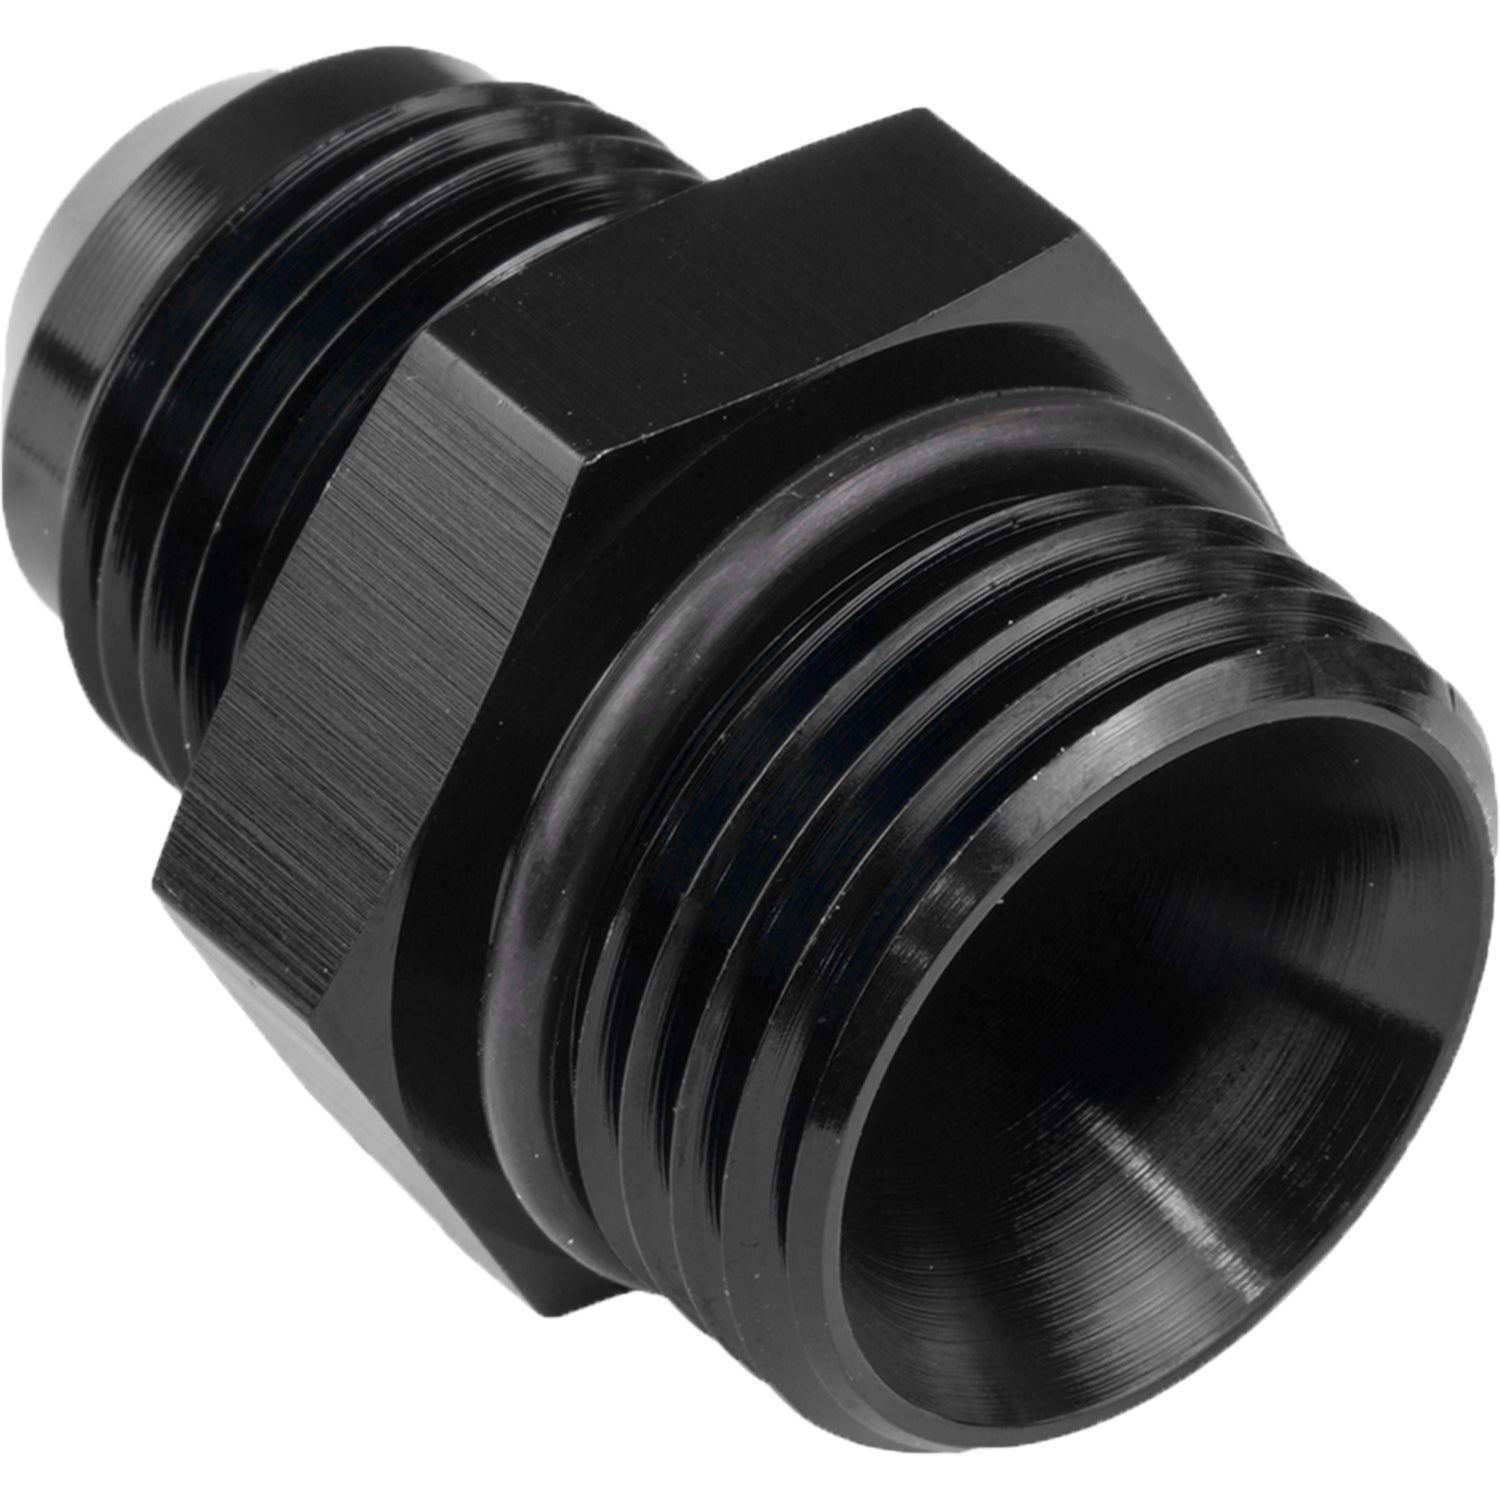 Proflow Fitting Straight Adaptor -10AN To -08AN O-Ring Port Black PFE920-10-08BK